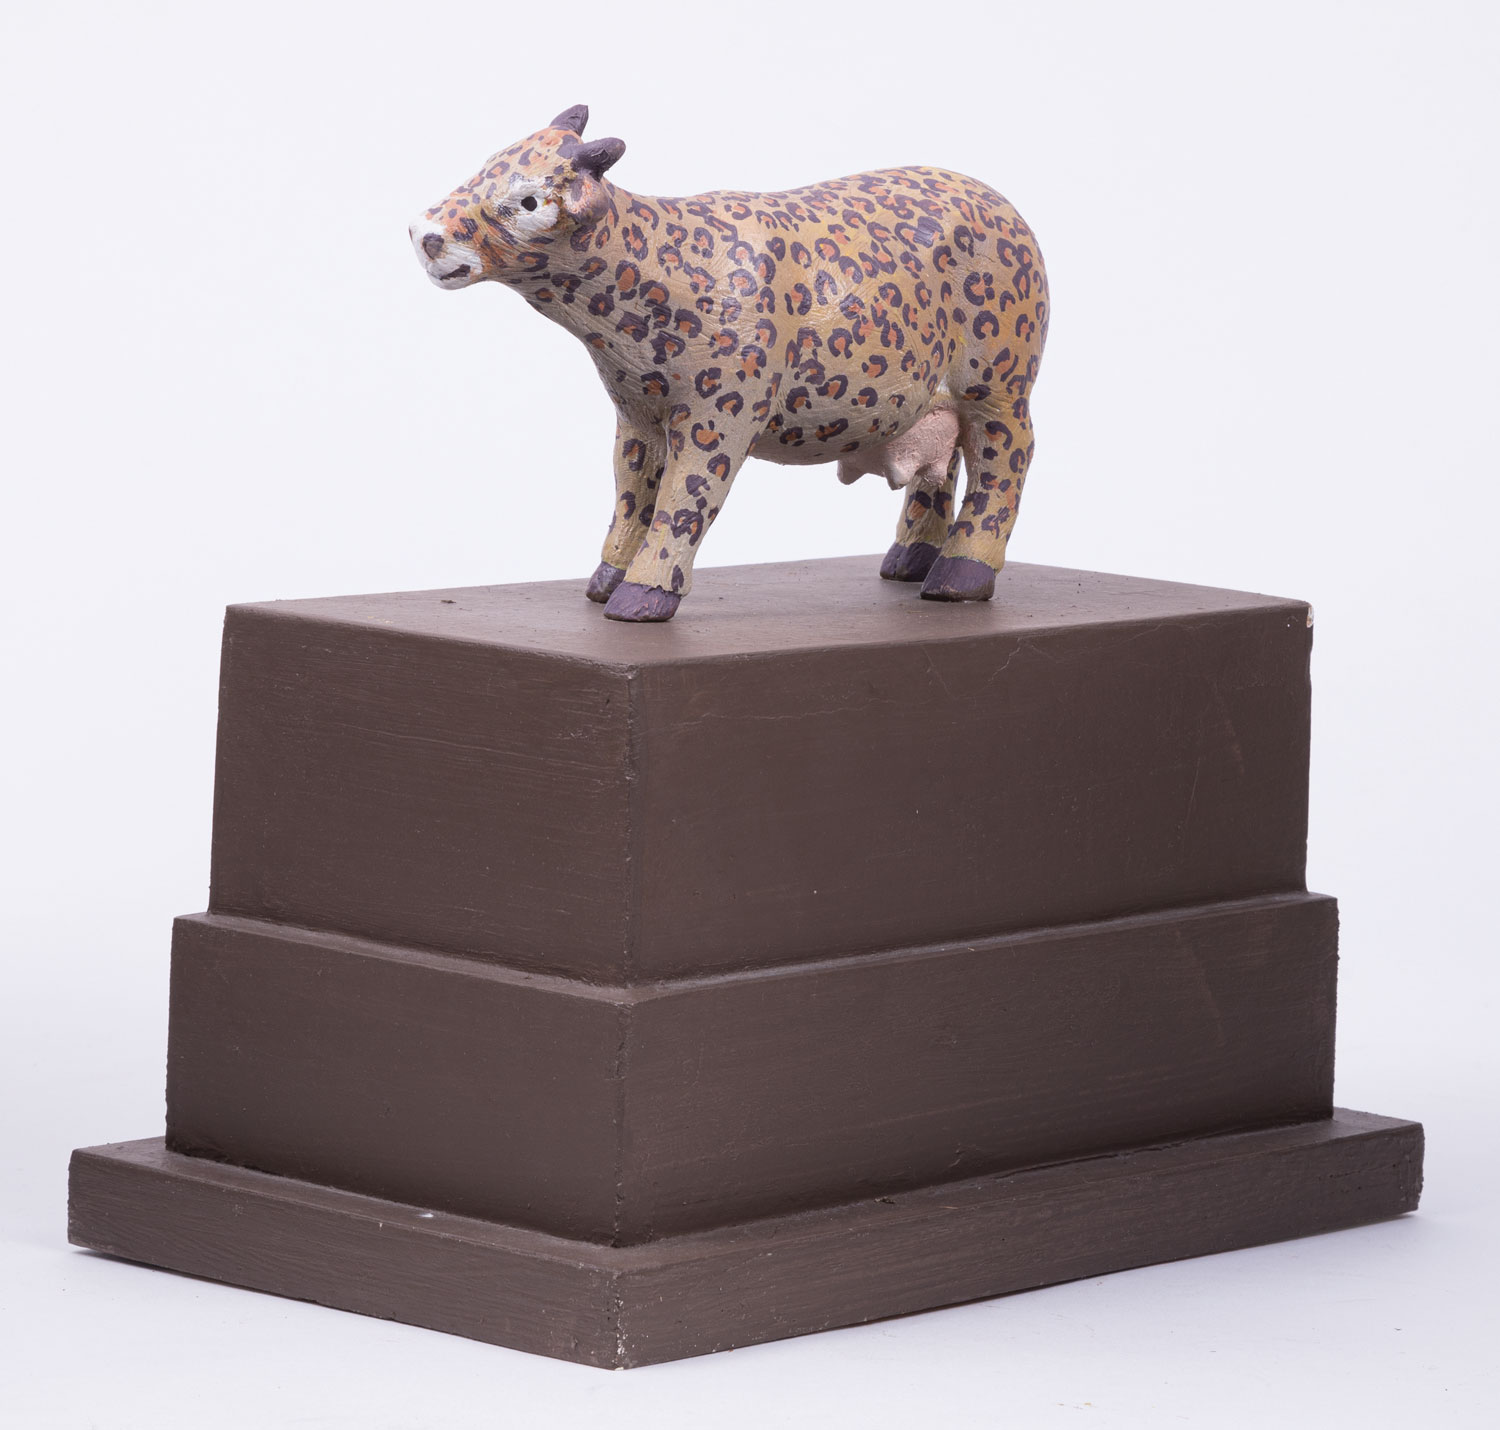 José-Mariá Cundín (Spanish/New Orleans, b. 1938), "The Dangerous Cow", 2006, painted plastic and - Image 2 of 3